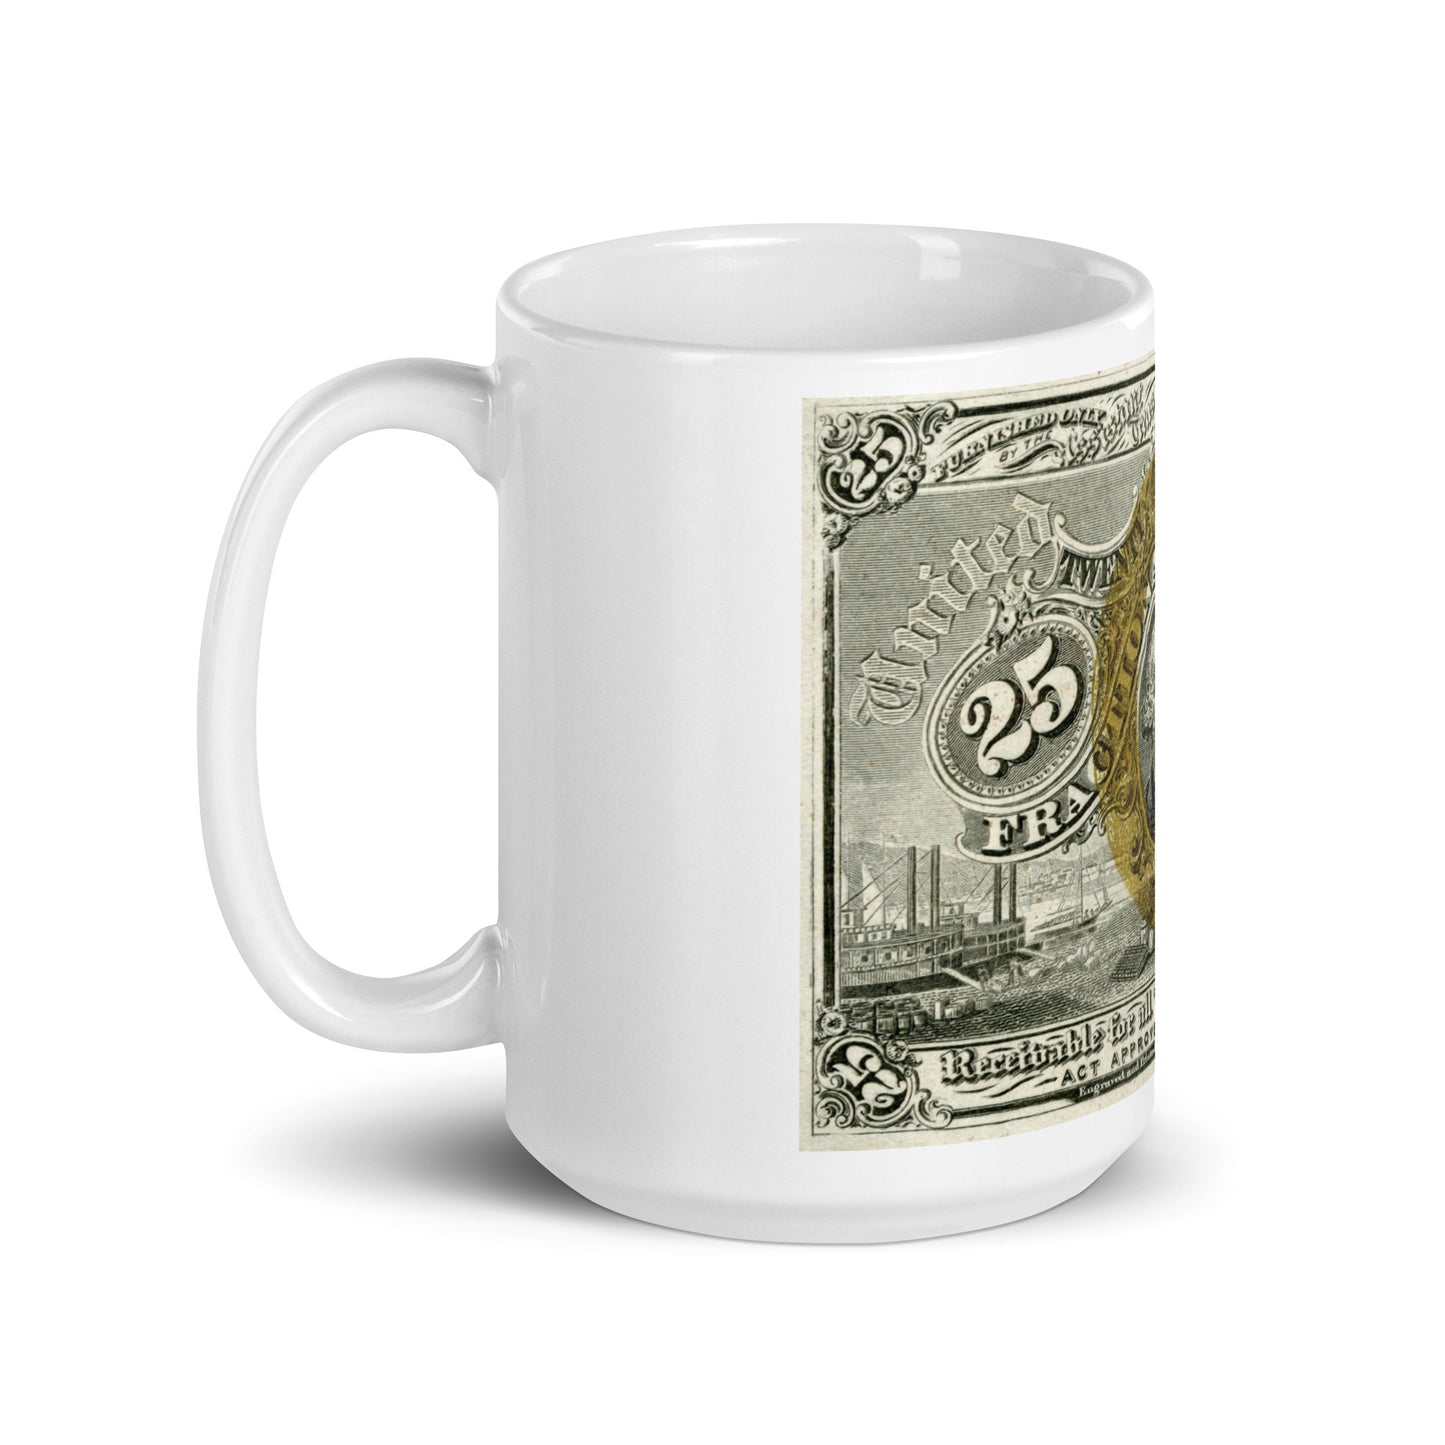 25 Cents 2ND Issue Fractional Currency Edition - Classic Currency Collector's Mug